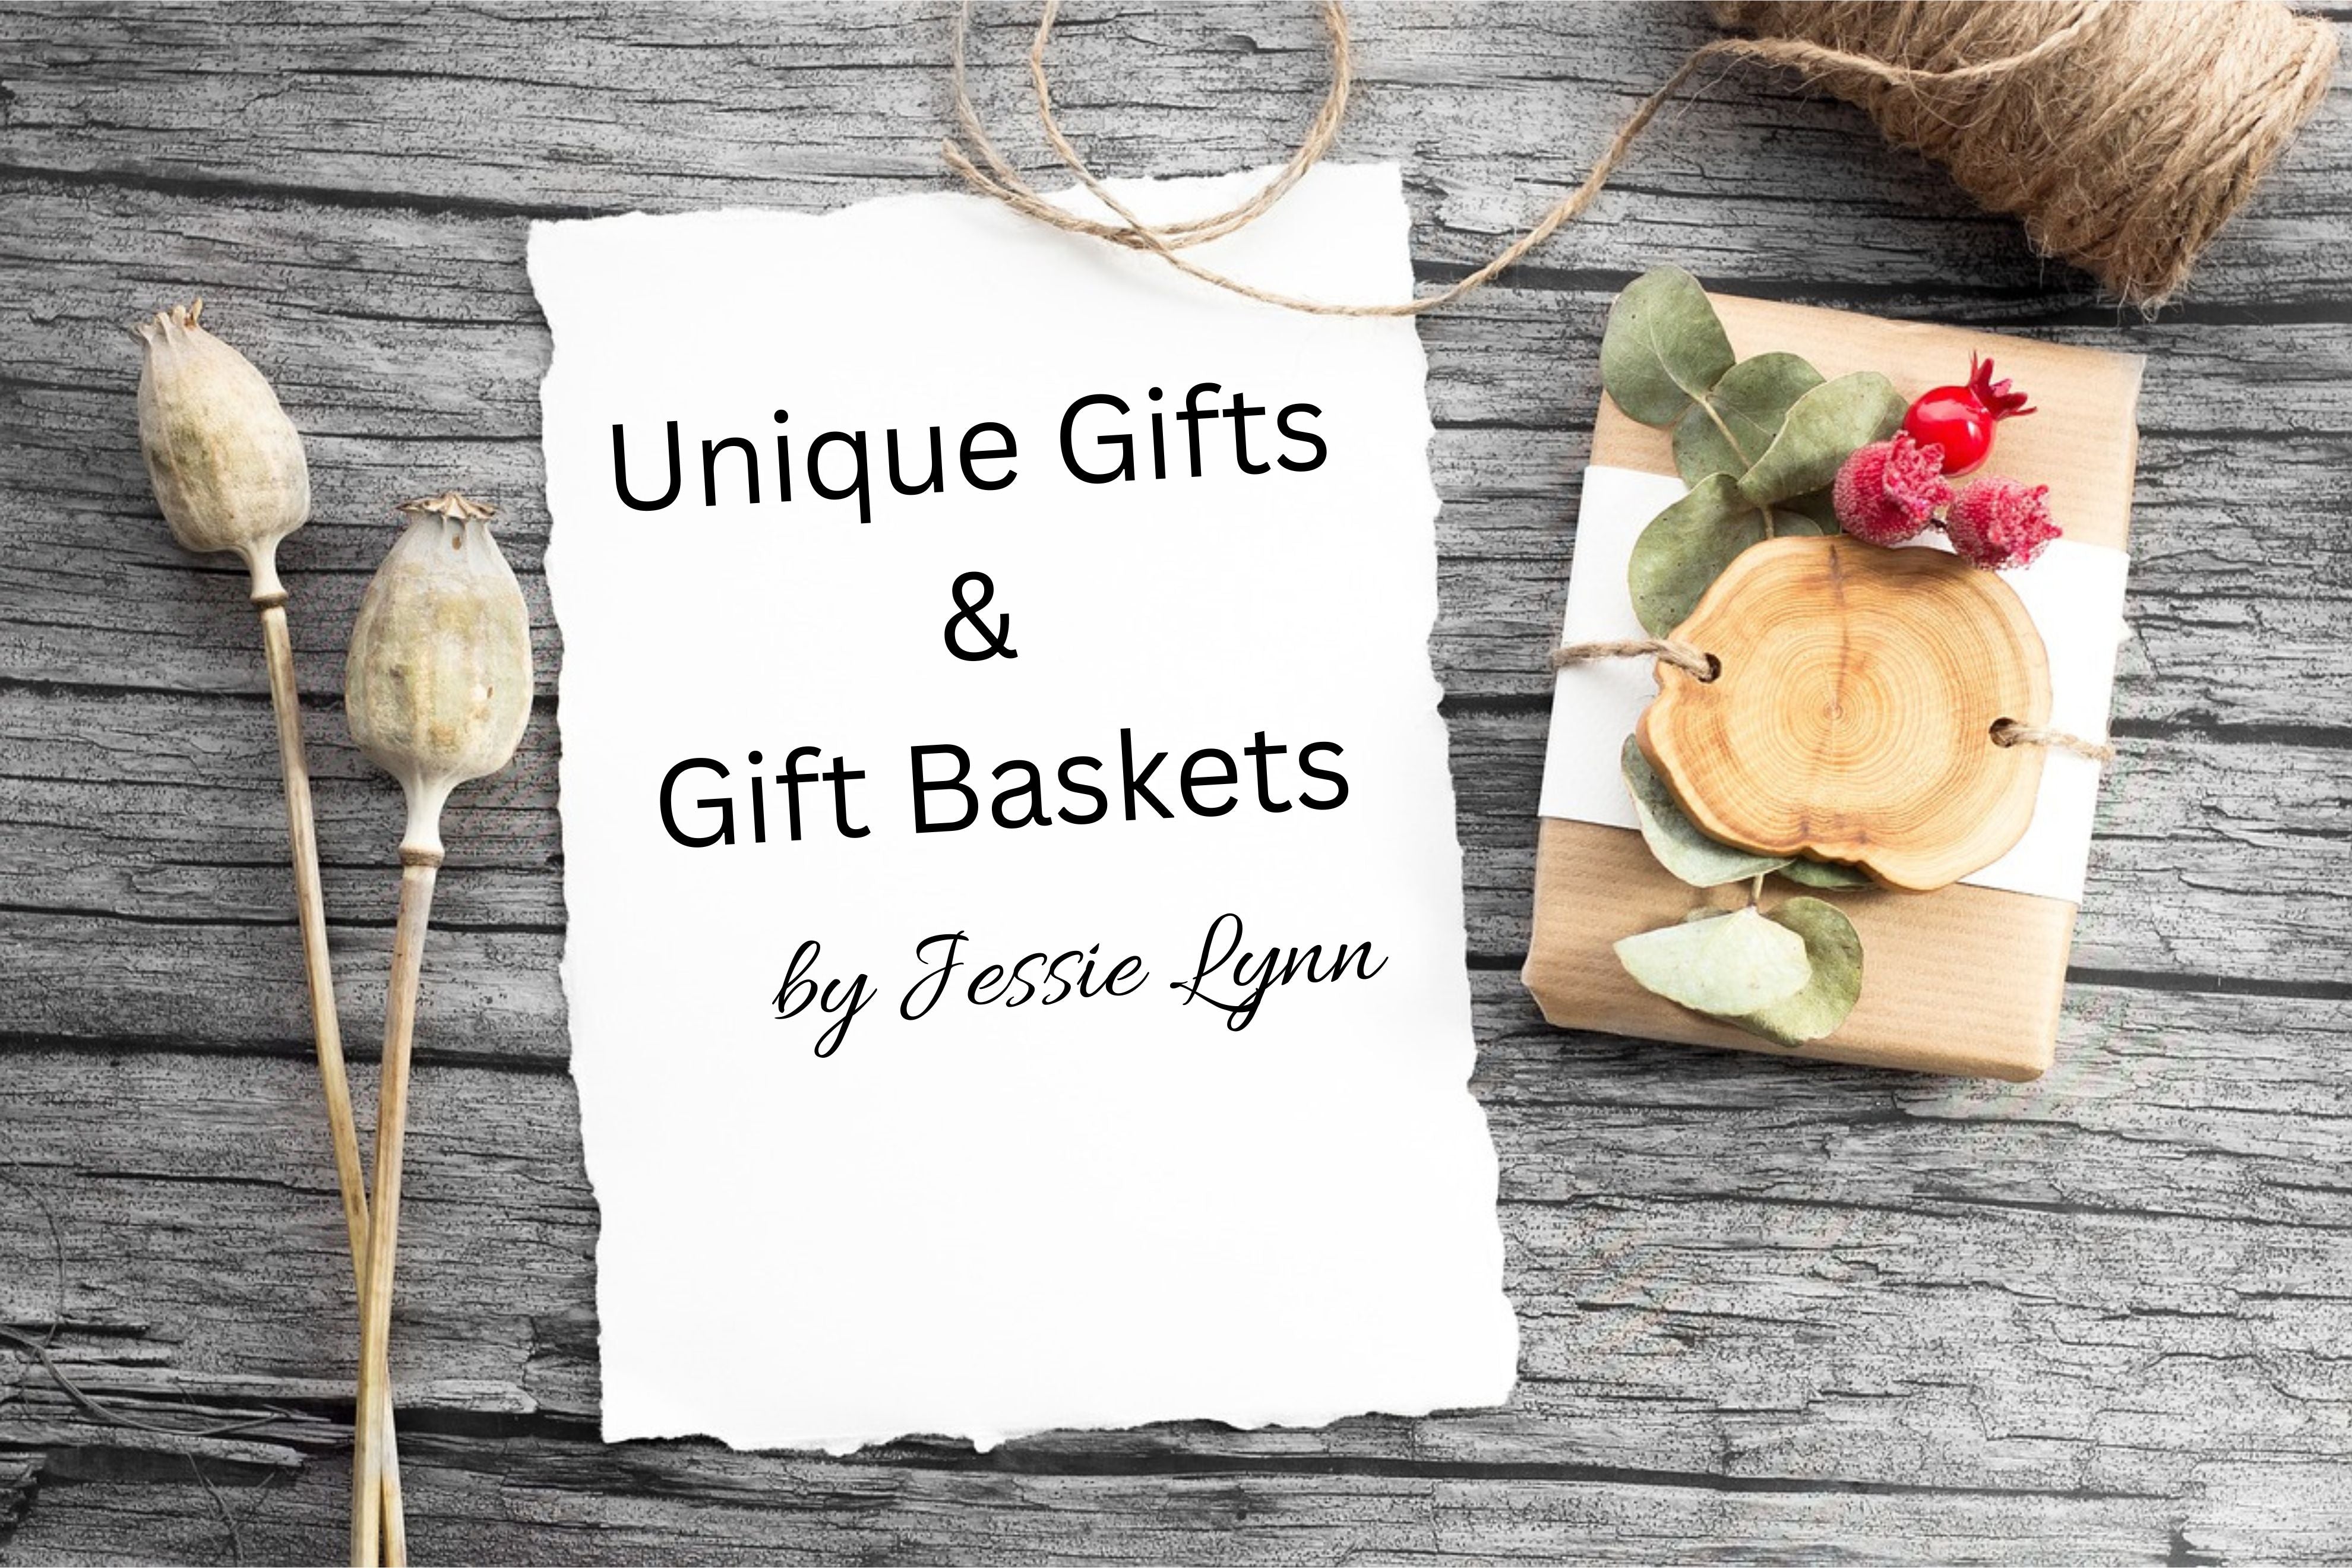 5 Reasons Why Gift Baskets are the Perfect Gift | Gift Ideas | Unique gift  baskets, Gift baskets, Christmas gifts for friends